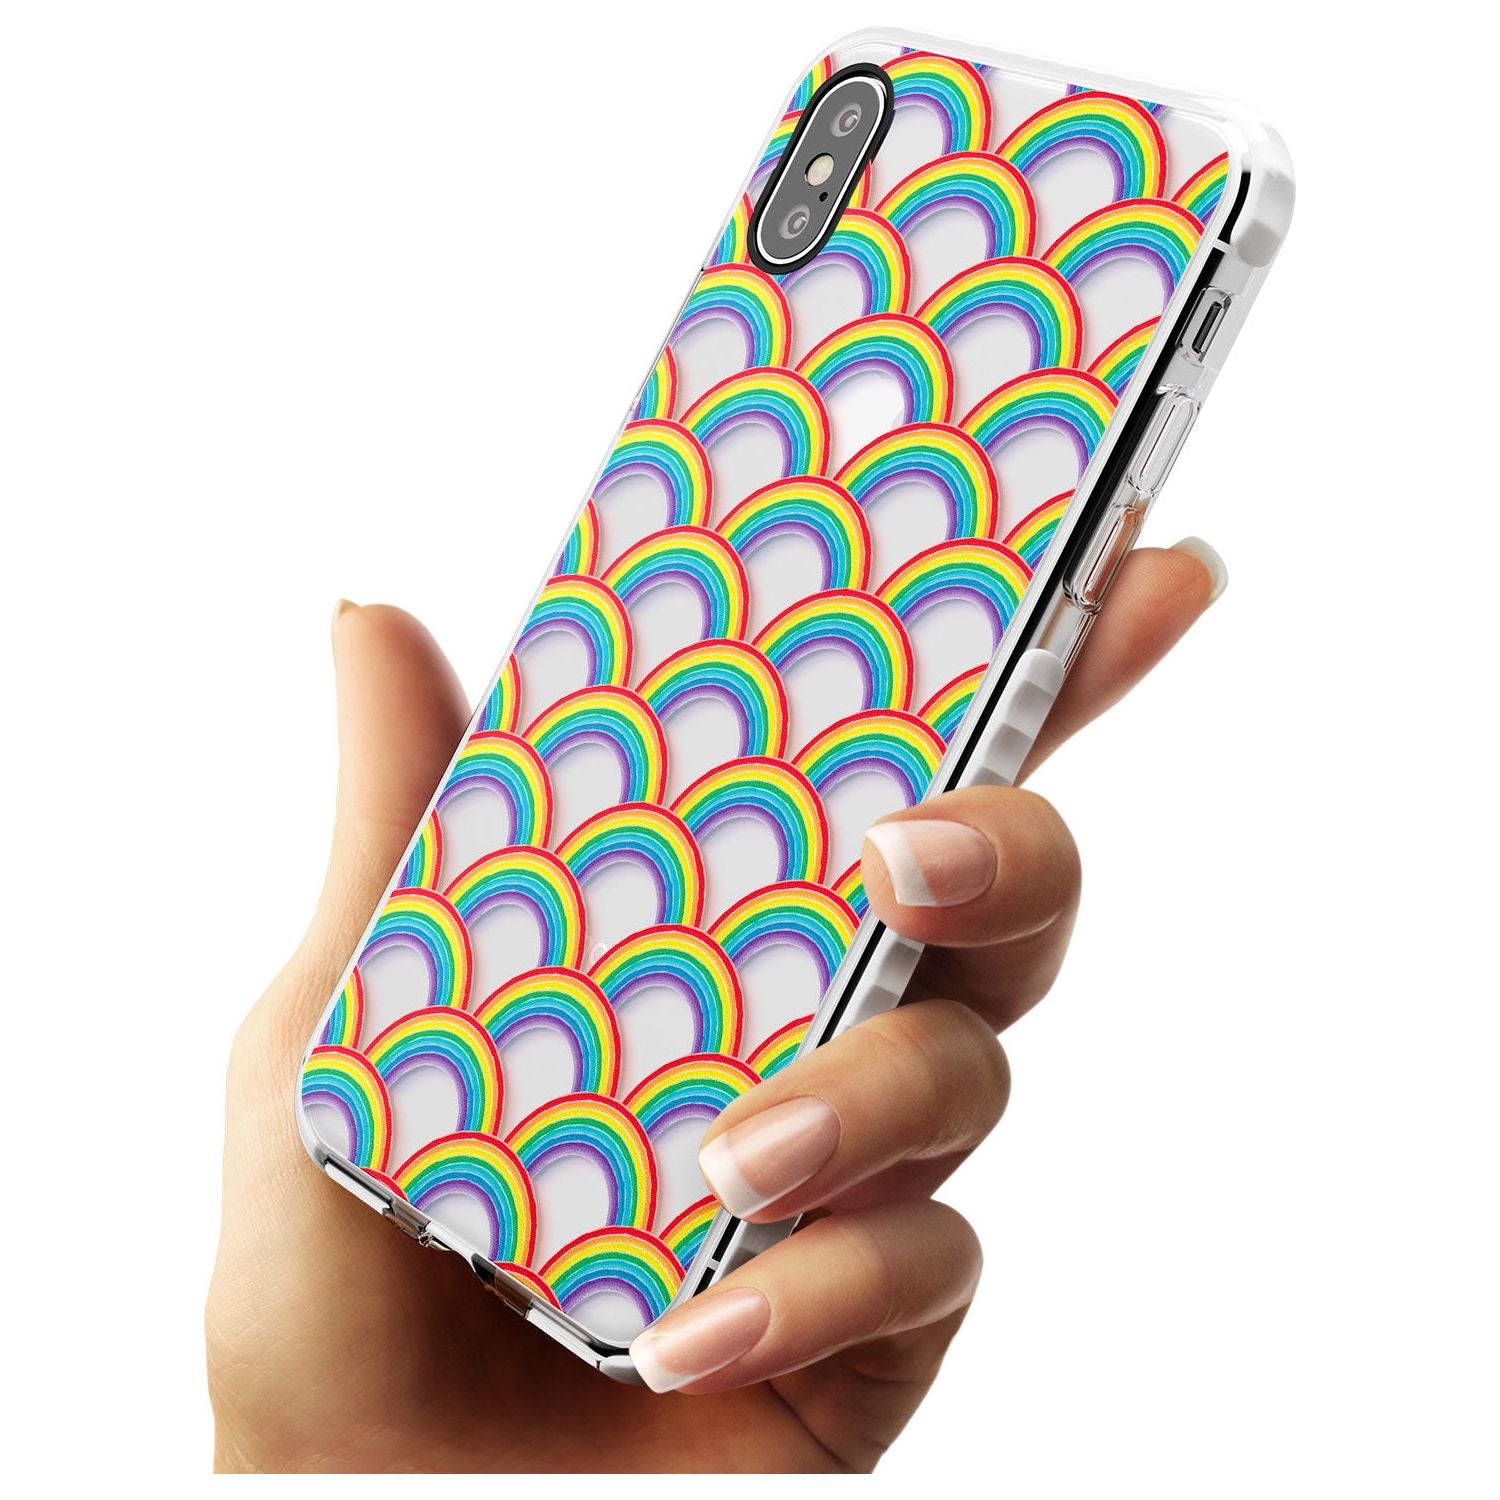 Somewhere over the rainbow Impact Phone Case for iPhone X XS Max XR